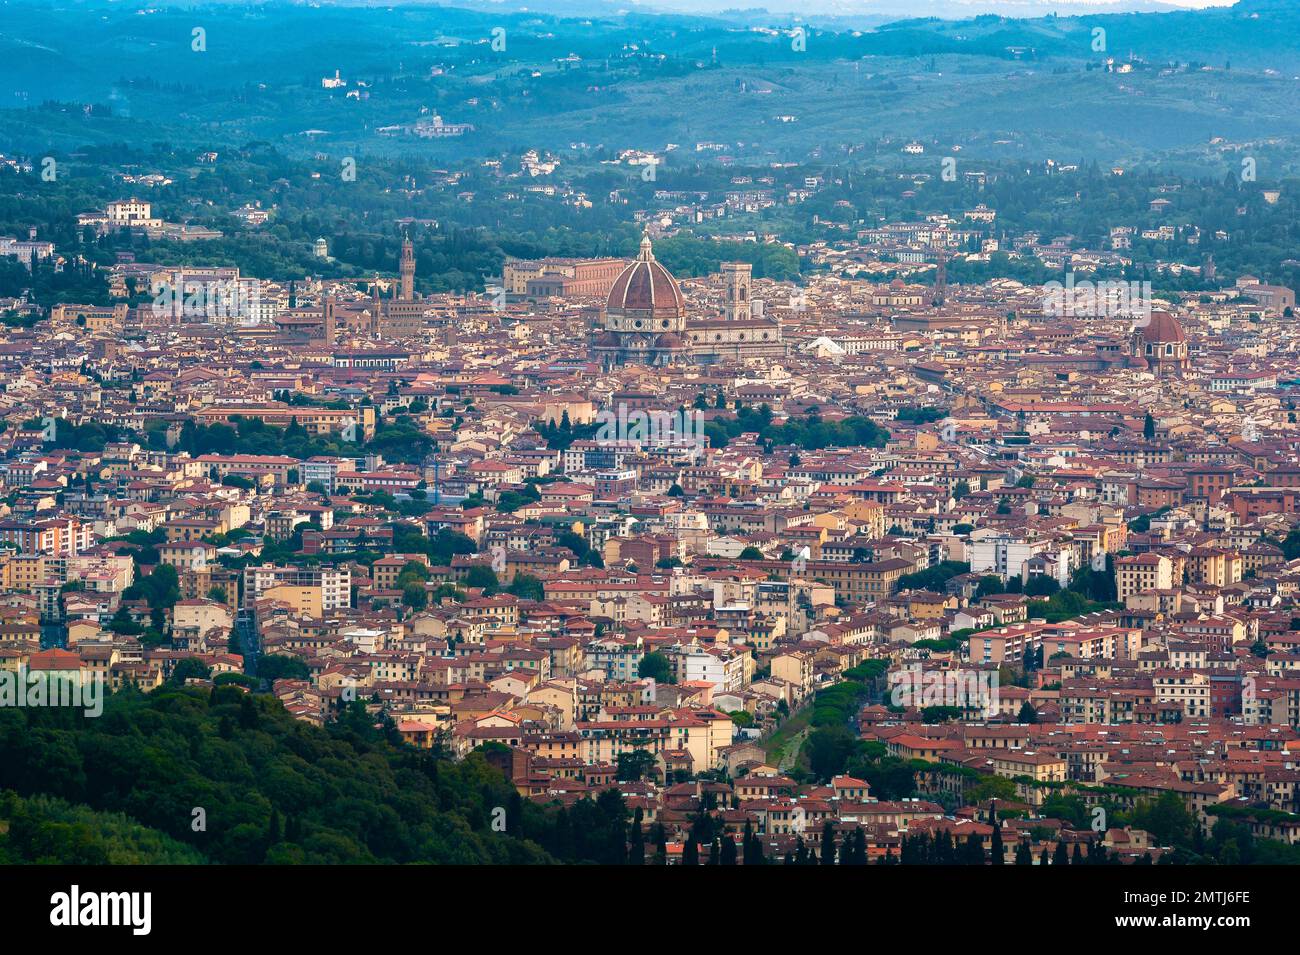 Florence city, aerial view of the historic cityscape of Florence sited in the hills of the countryside of Tuscany, Florence, Firenze, Italy, Europe. Stock Photo